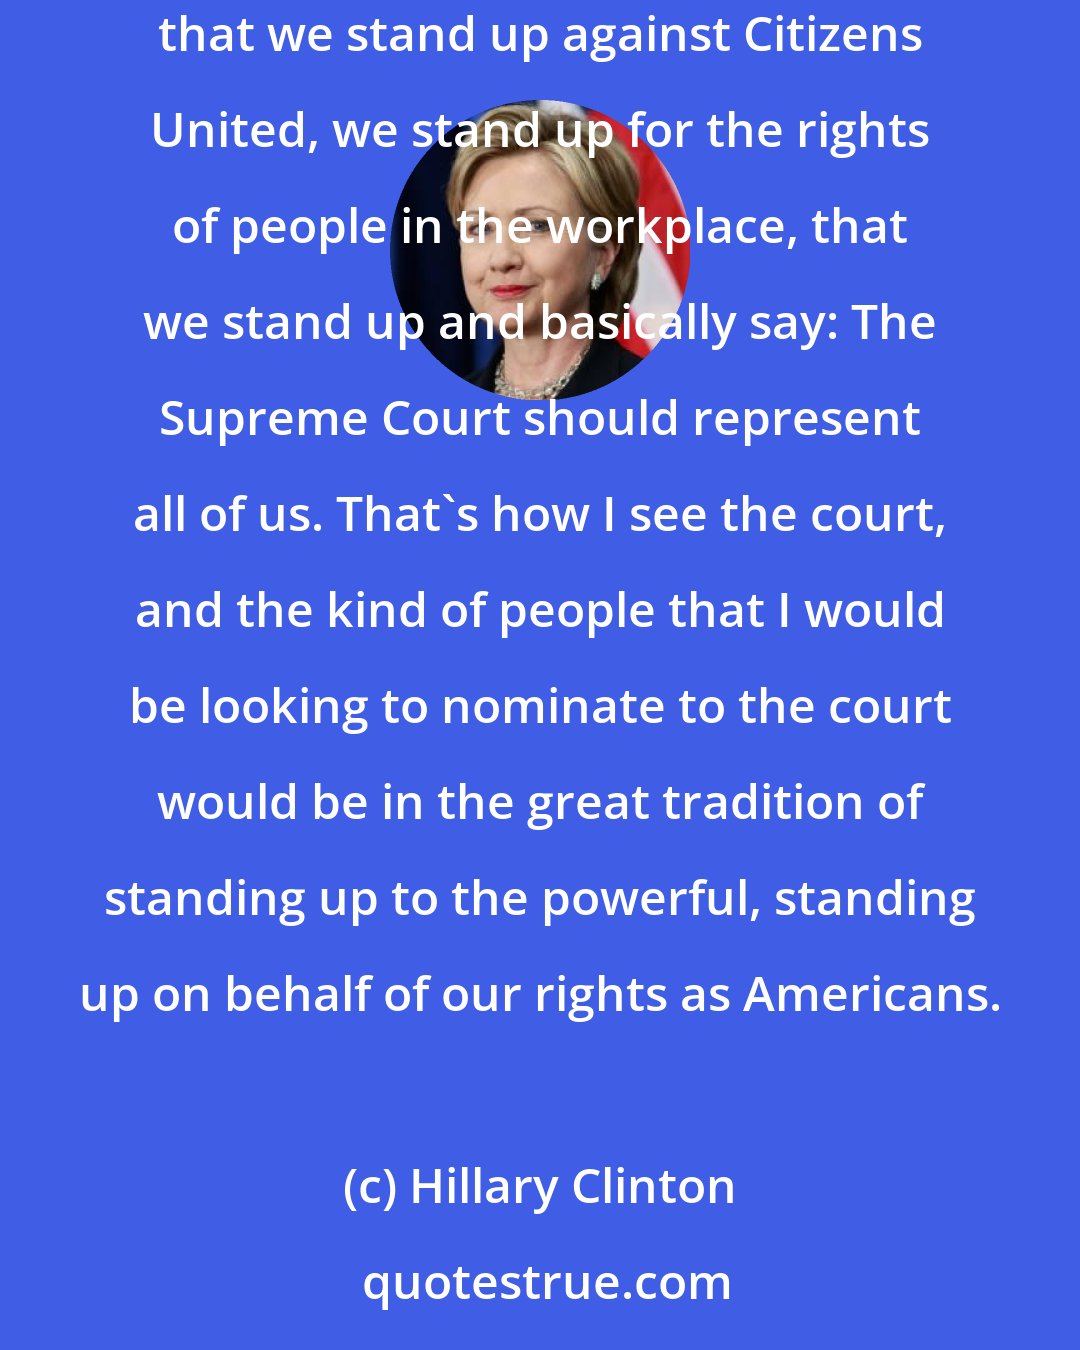 Hillary Clinton: I feel that at this point in our country's history, it is important that we not reverse marriage equality, that we not reverse Roe v. Wade, that we stand up against Citizens United, we stand up for the rights of people in the workplace, that we stand up and basically say: The Supreme Court should represent all of us. That's how I see the court, and the kind of people that I would be looking to nominate to the court would be in the great tradition of standing up to the powerful, standing up on behalf of our rights as Americans.